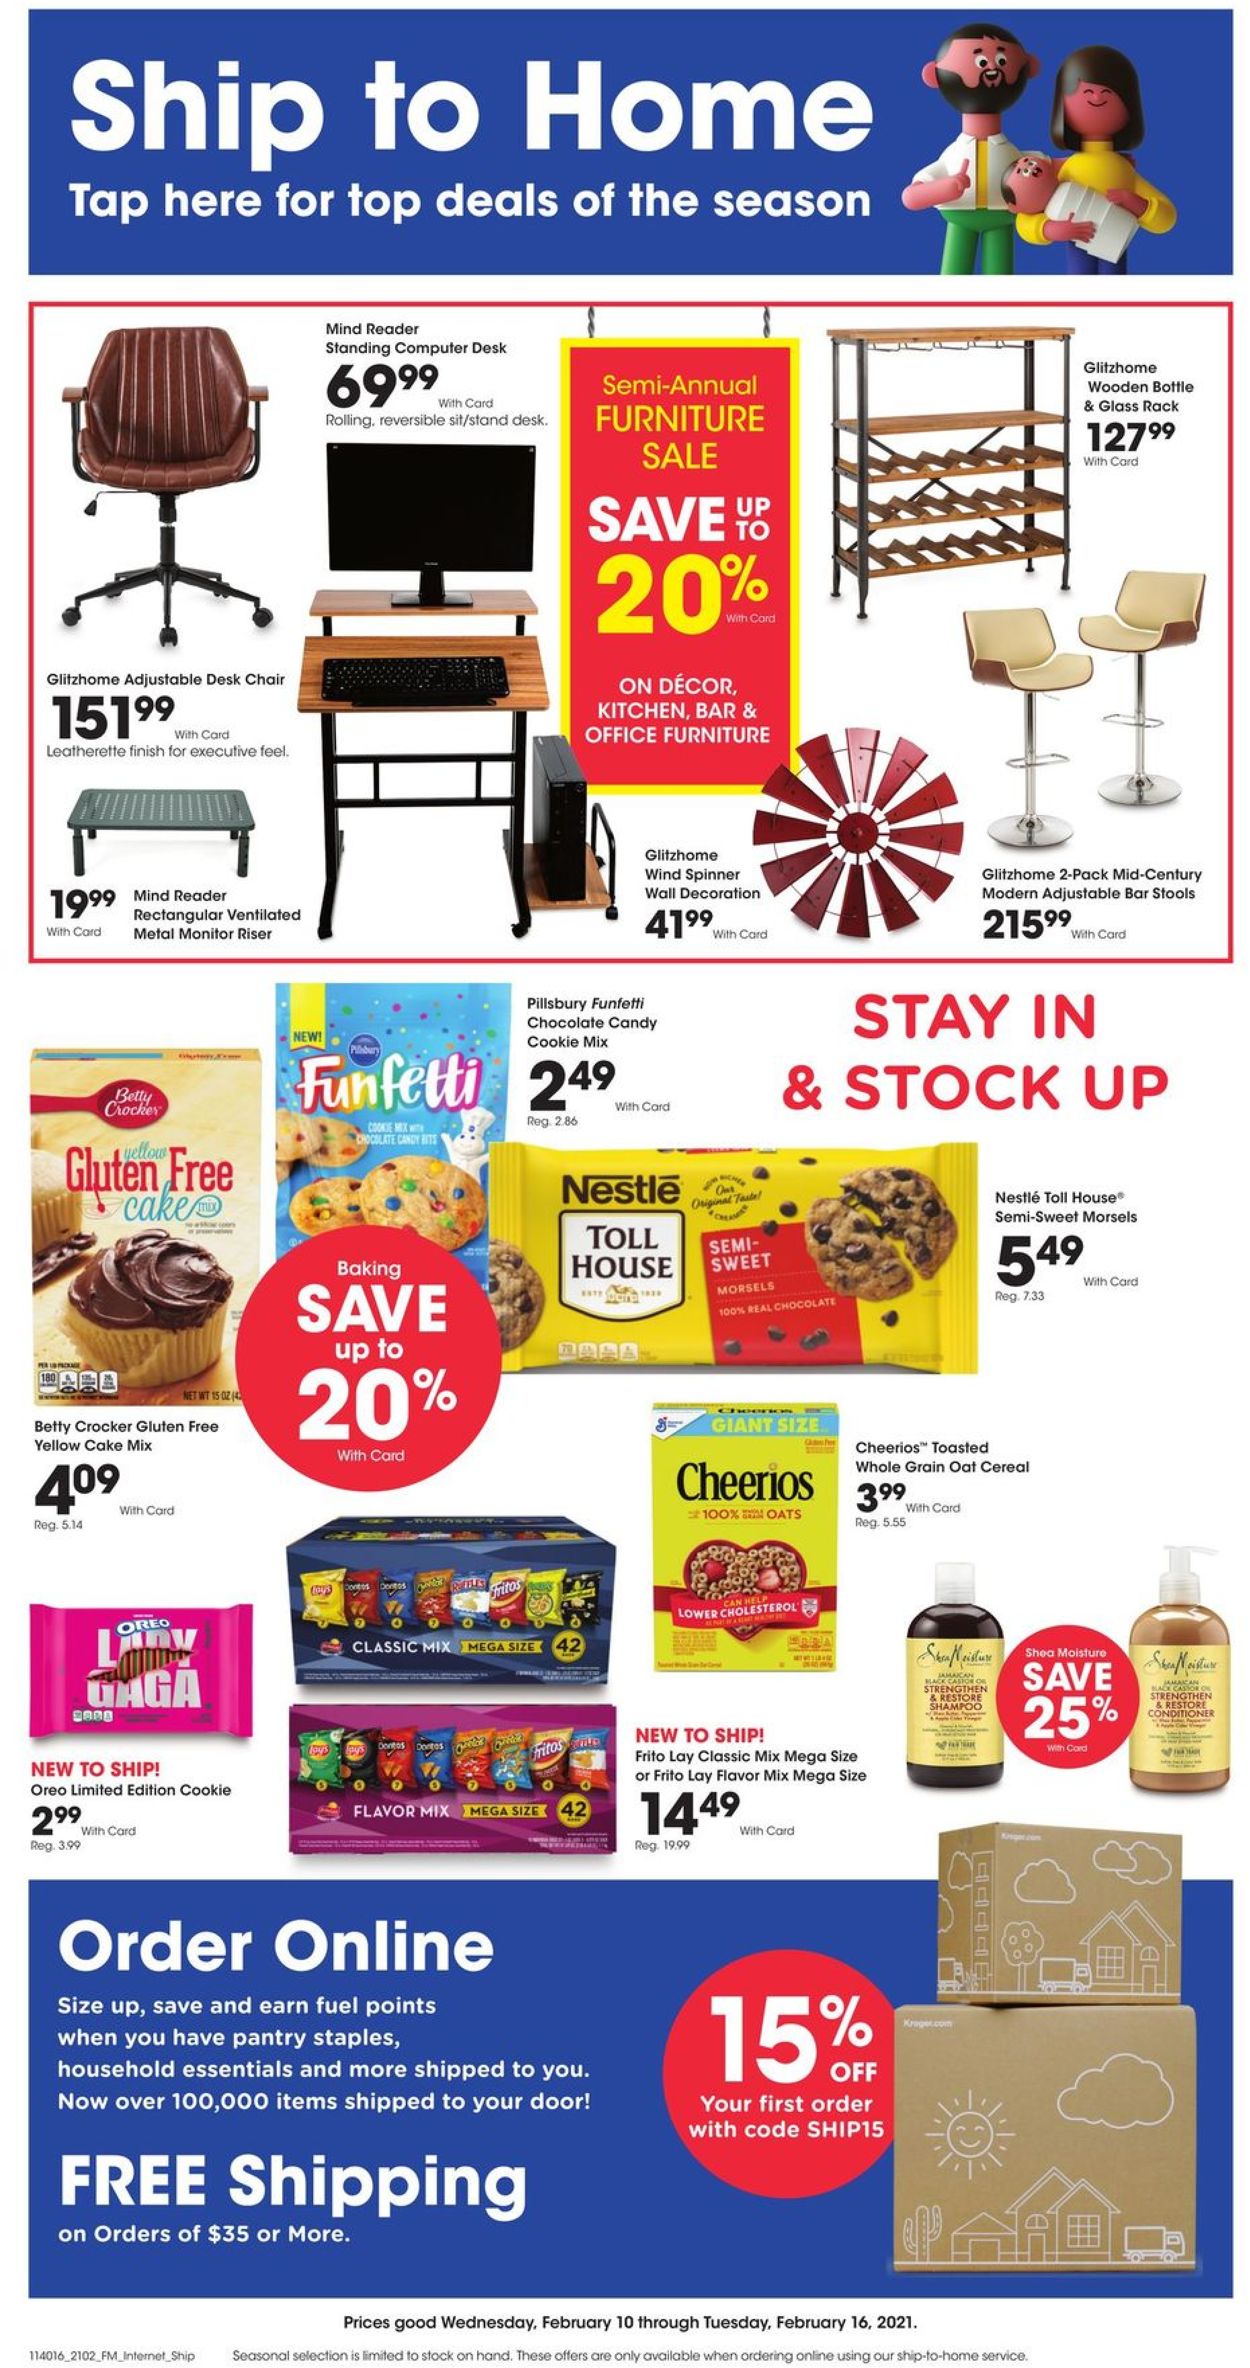 King Soopers Ad from 02/10/2021